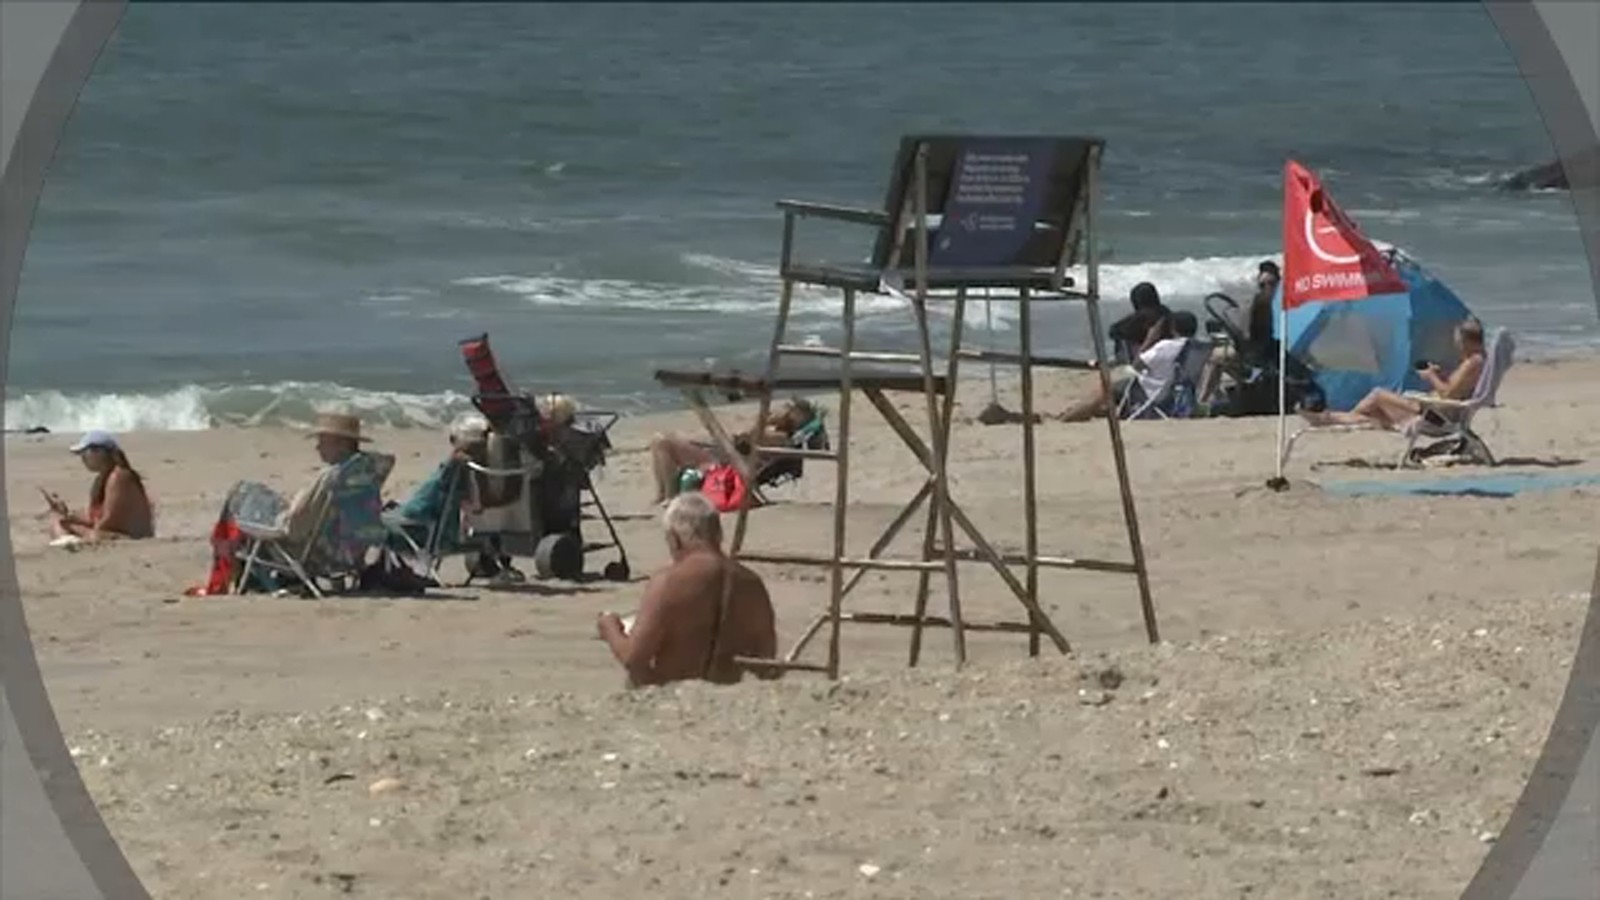 New York City to hire more lifeguards this summer as public beaches open this weekend